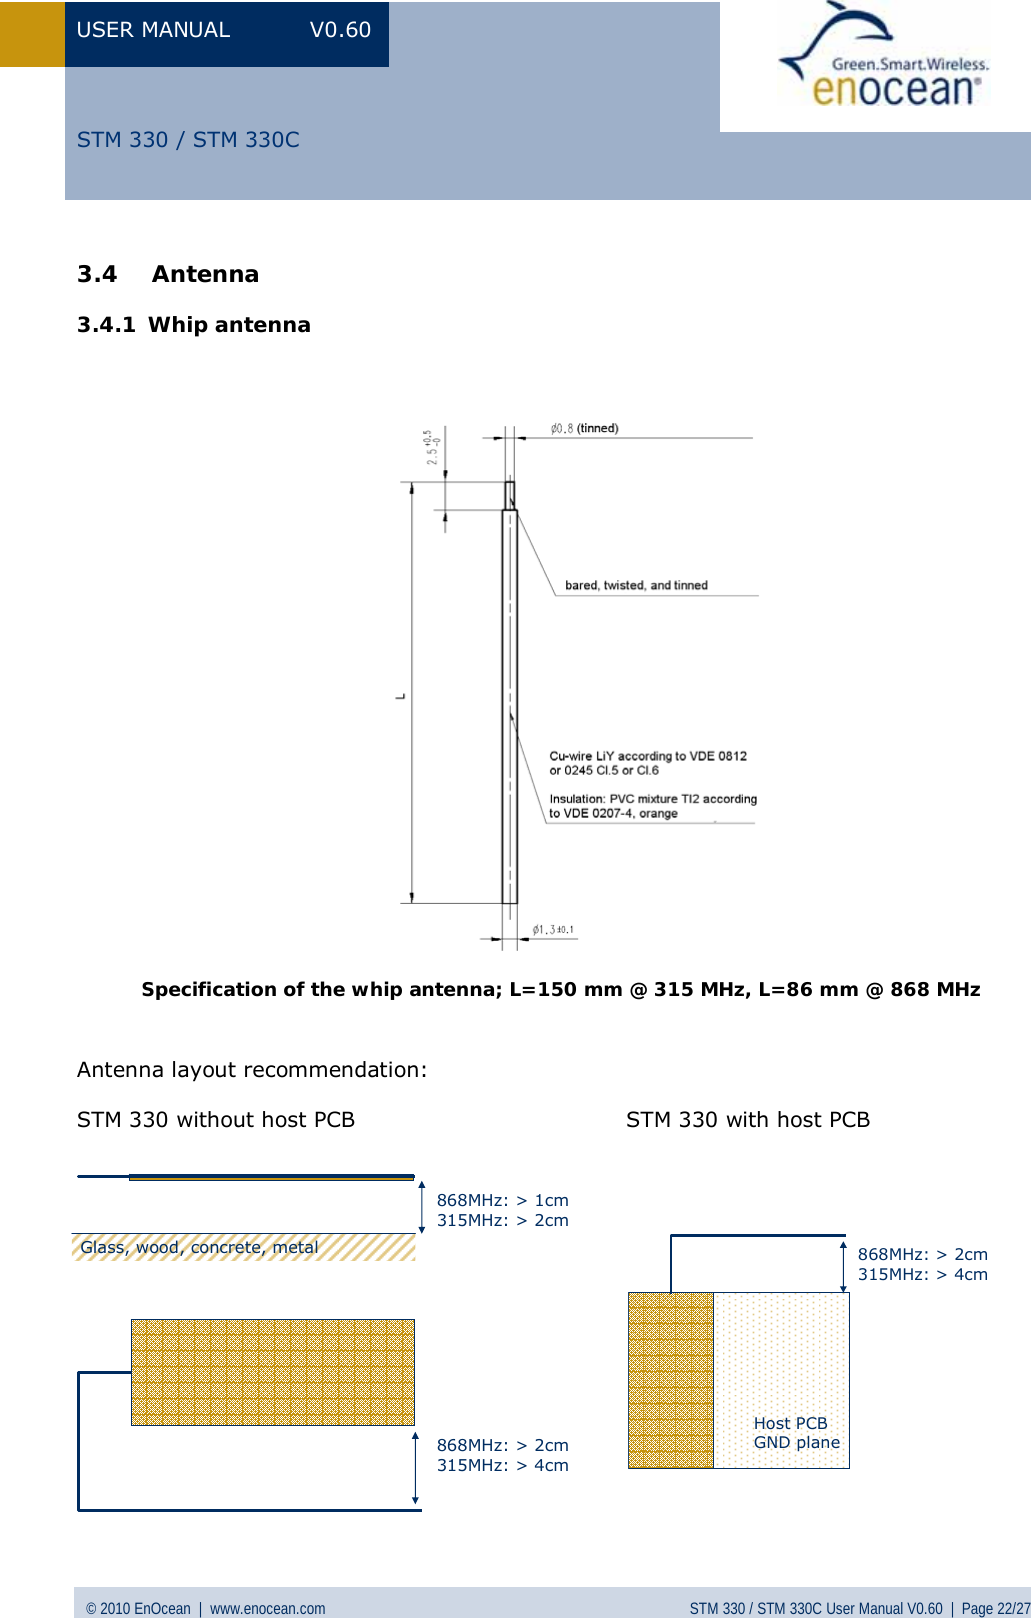 USER MANUAL V0.60 © 2010 EnOcean  |  www.enocean.com STM 330 / STM 330C User Manual V0.60  |  Page 22/27  STM 330 / STM 330C3.4 Antenna  3.4.1 Whip antenna       Specification of the whip antenna; L=150 mm @ 315 MHz, L=86 mm @ 868 MHz  Antenna layout recommendation:  STM 330 without host PCB                                     STM 330 with host PCB              Glass, wood, concrete, metal868MHz: &gt; 2cm315MHz: &gt; 4cm868MHz: &gt; 1cm315MHz: &gt; 2cm868MHz: &gt; 2cm315MHz: &gt; 4cmHost PCBGND plane